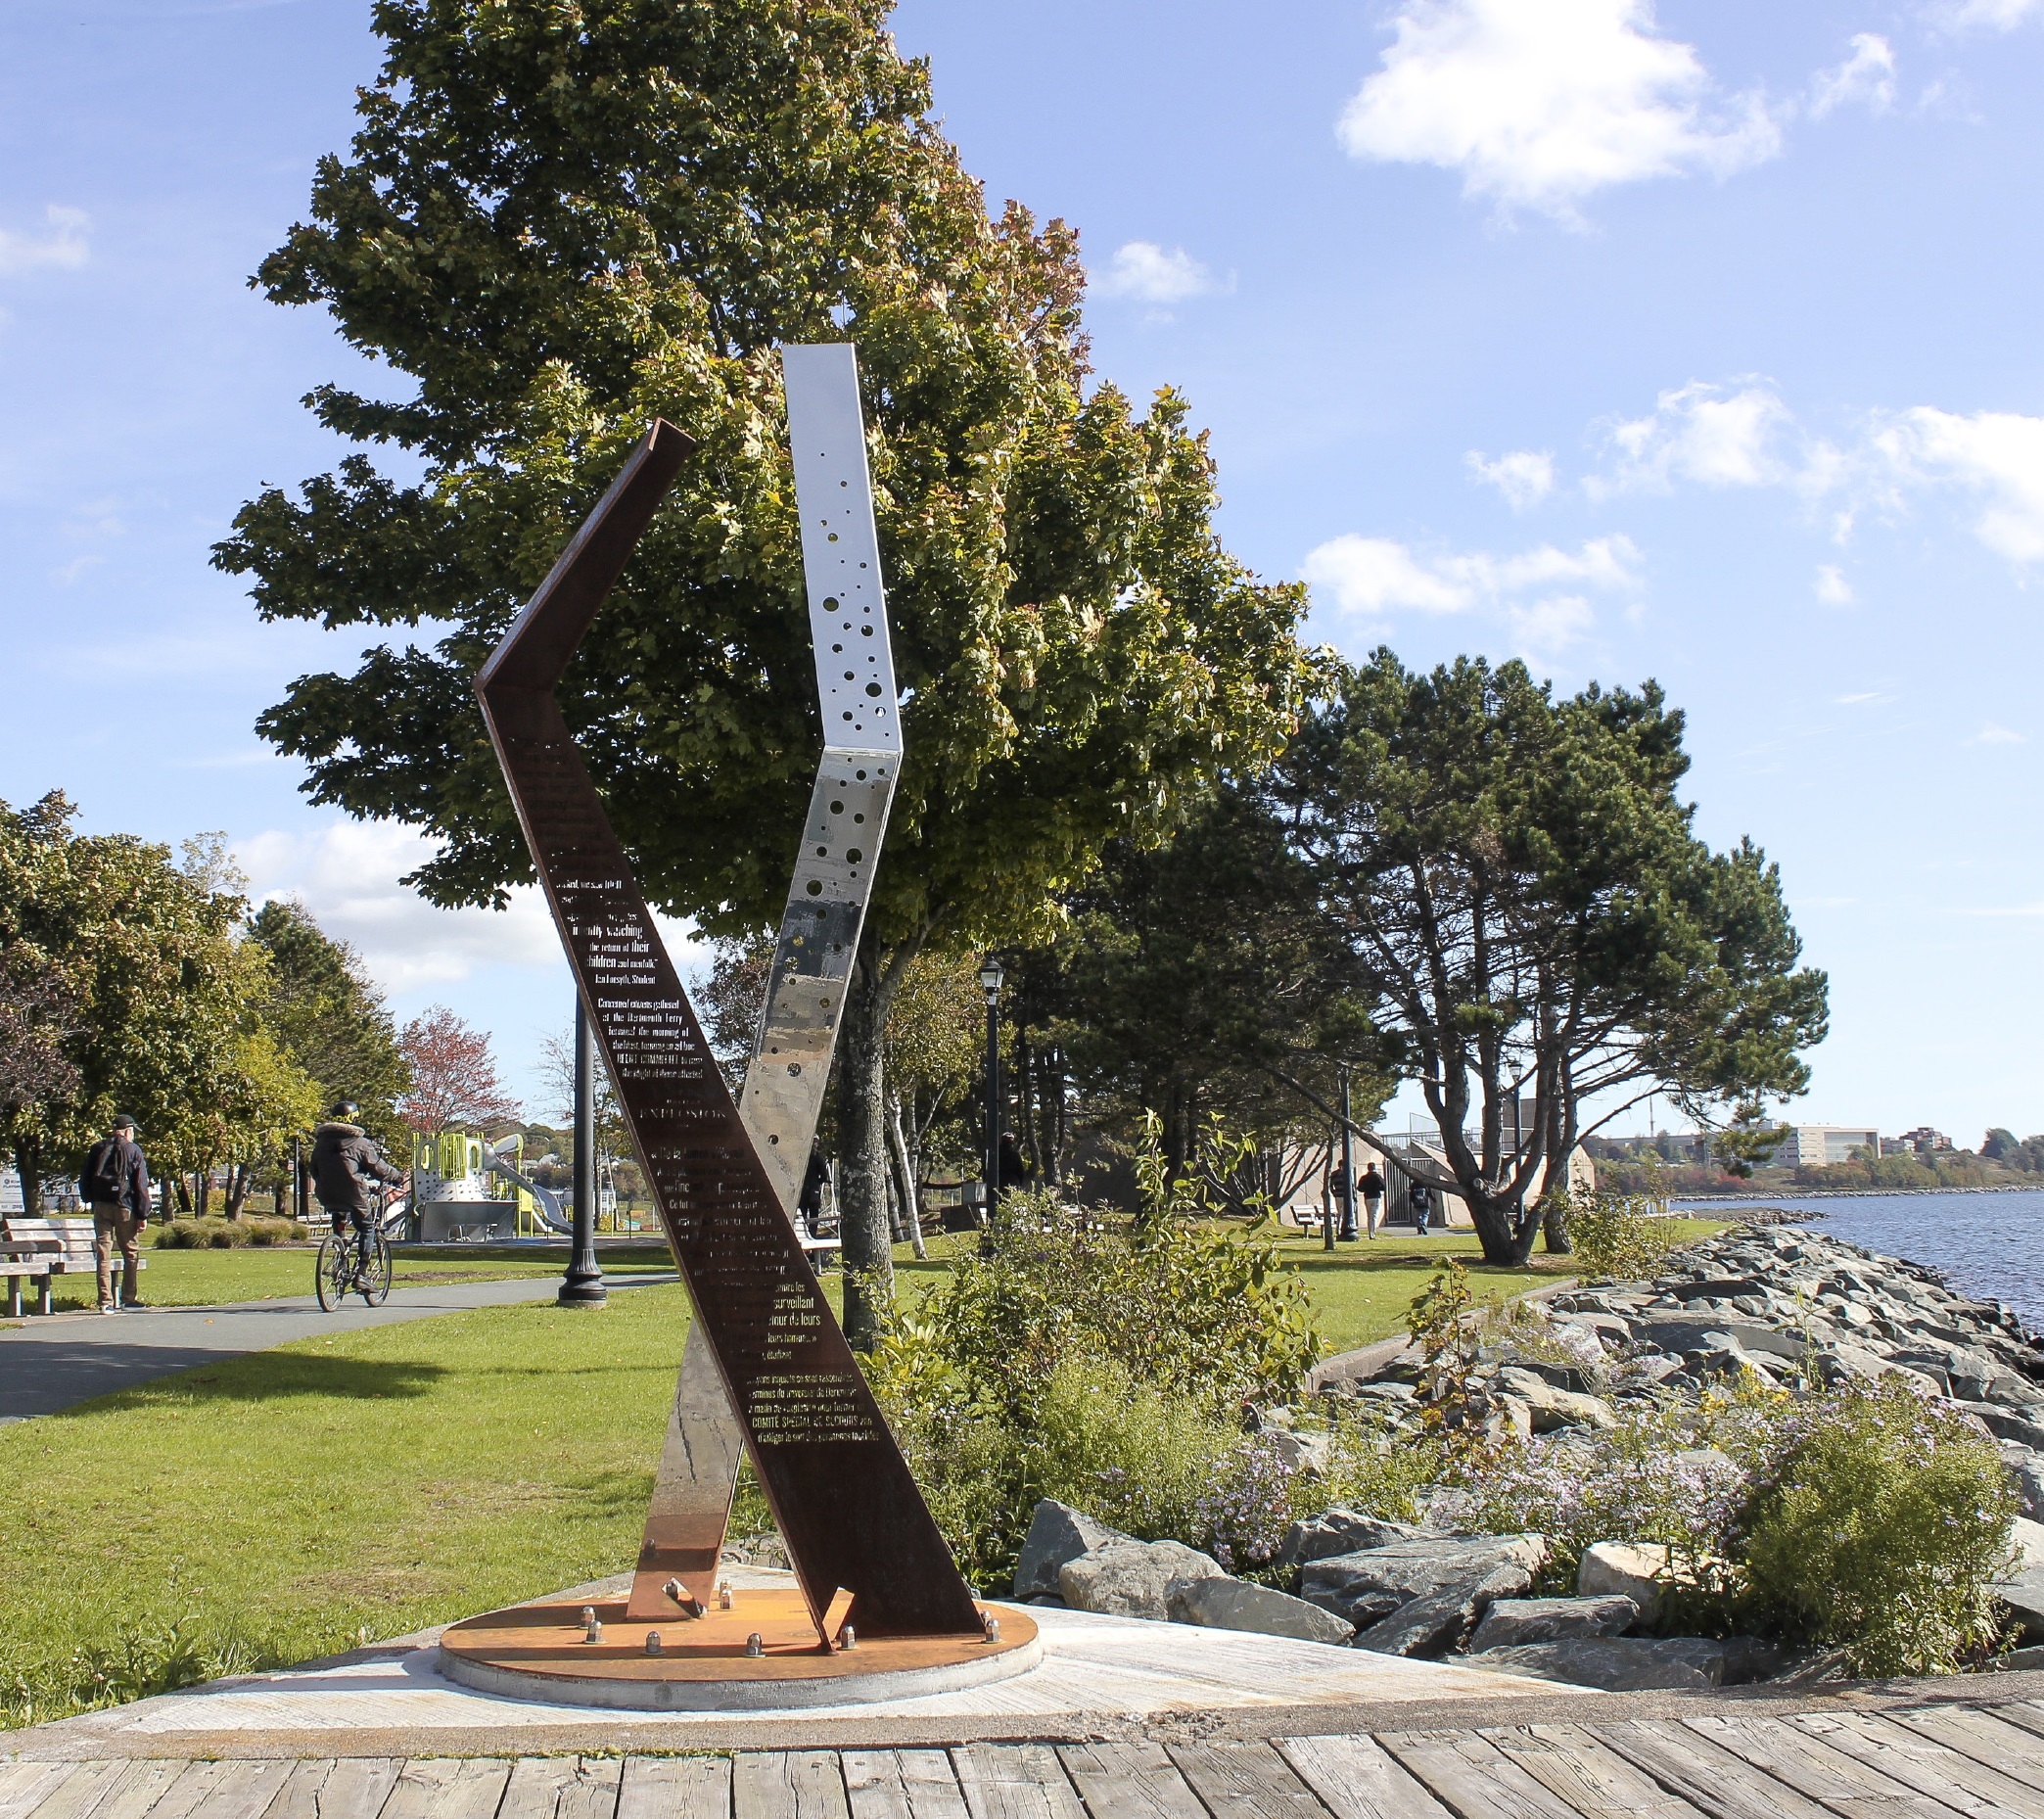 One of the Halifax Explosion Marker Sculptures in a park on a sunny day.